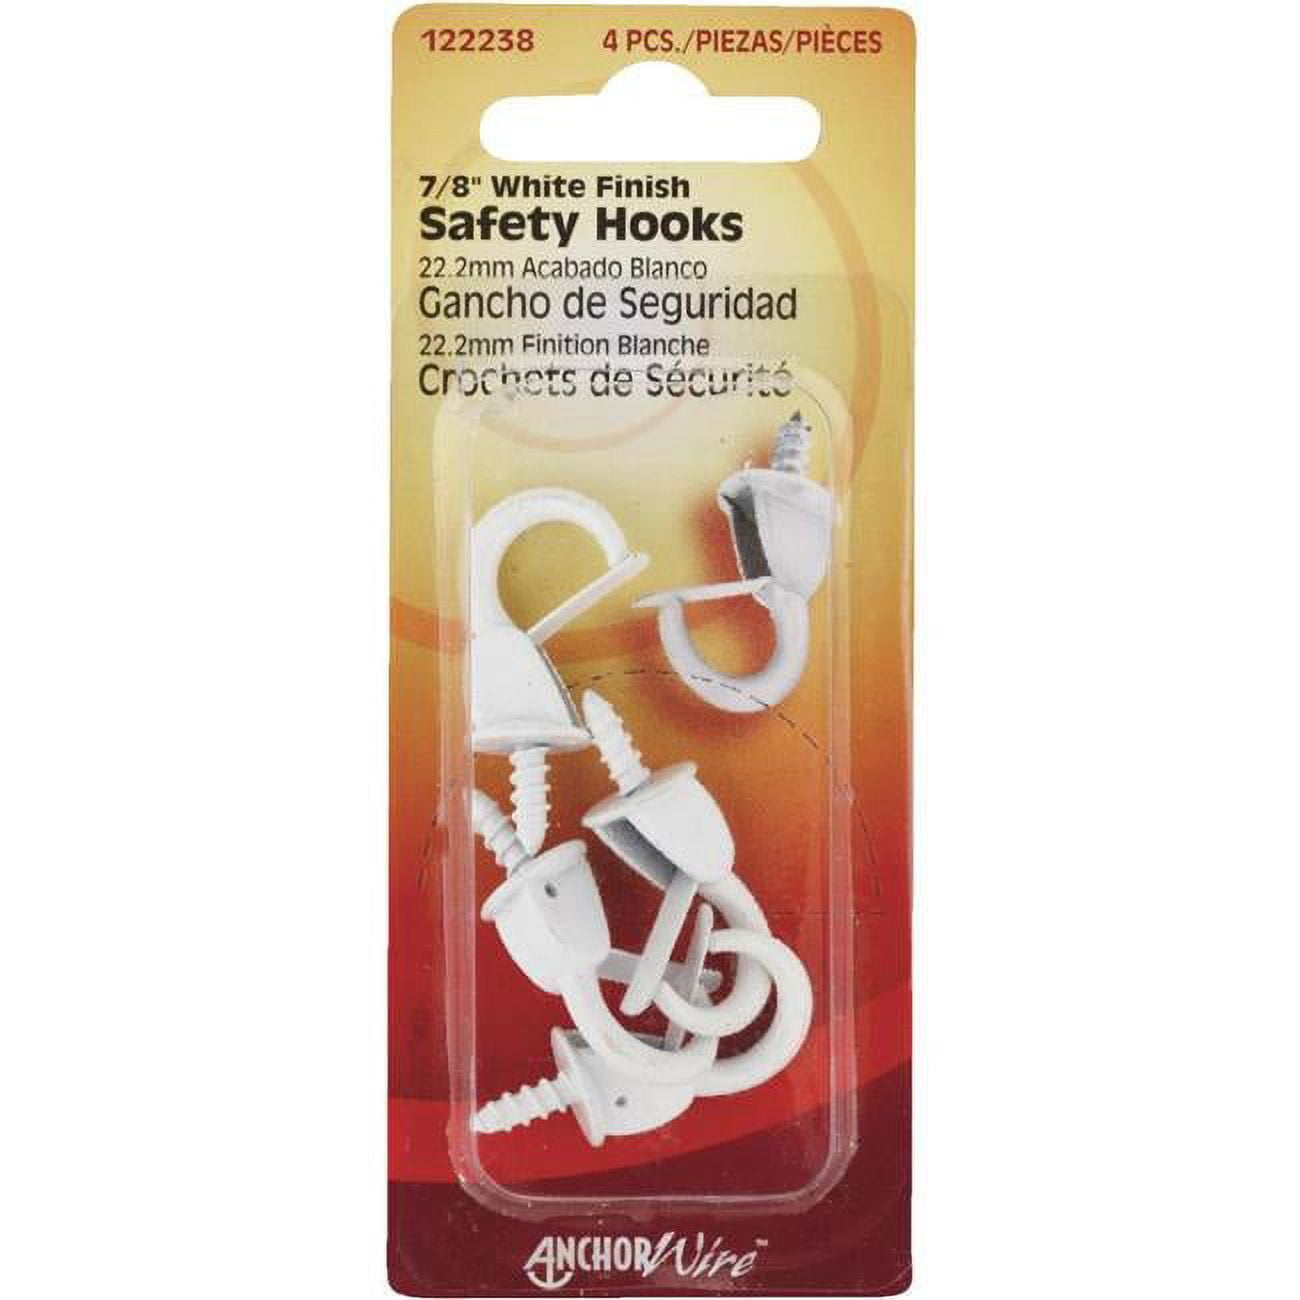 Picture of Hillman 122238 0.875 in. Anchor Wire Spring Safety Hook, White